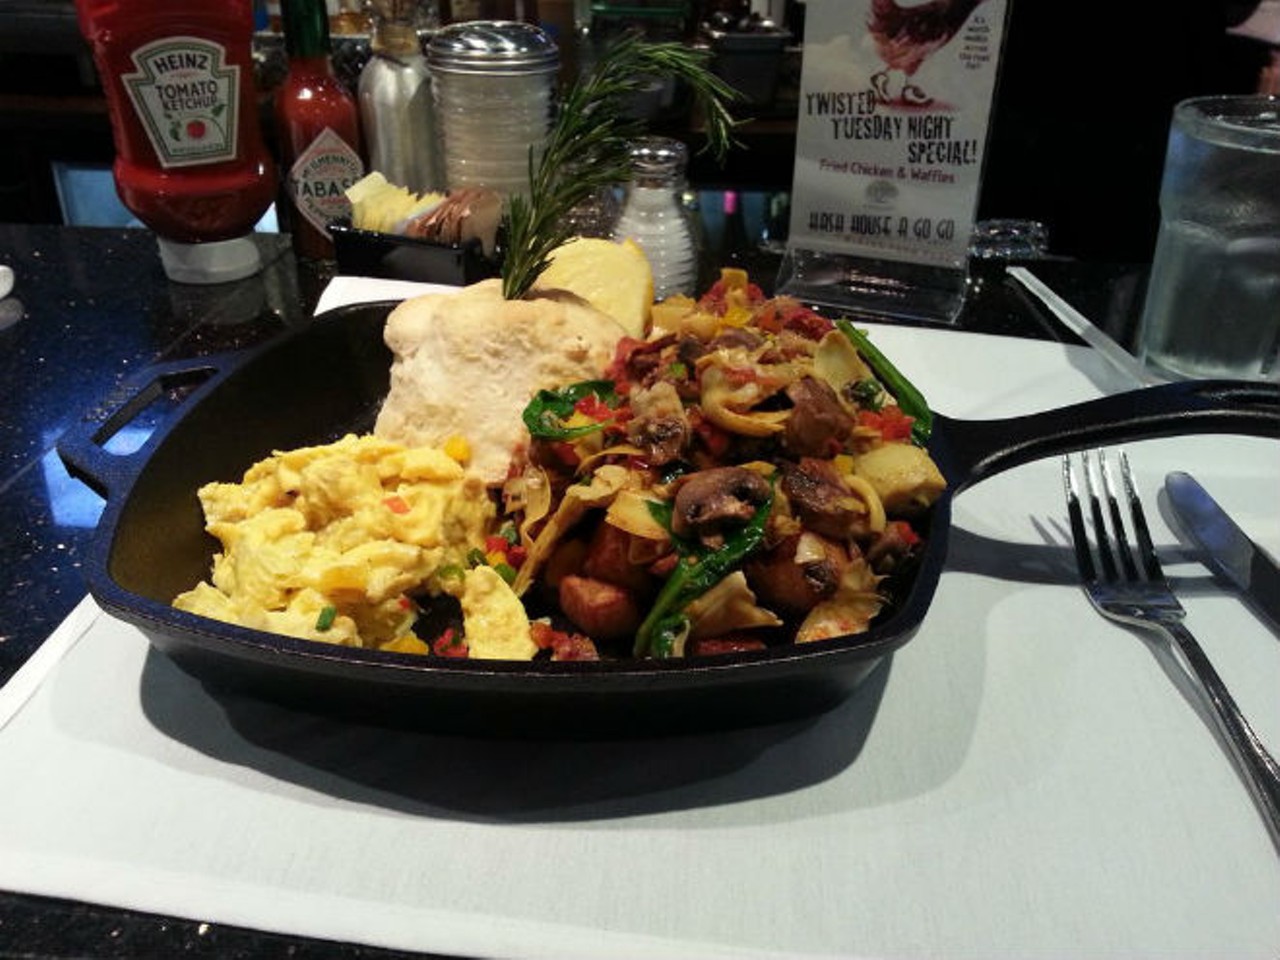 Hash House A Go Go
Breakfast served Sunday to Thursday, 8 a.m. - 10 p.m. and Friday and Saturday 8 a.m. - 11 p.m.
5350 International Drive
(407) 370-4646
www.hashhouseagogo.com
House Hash
Photo via Yelp